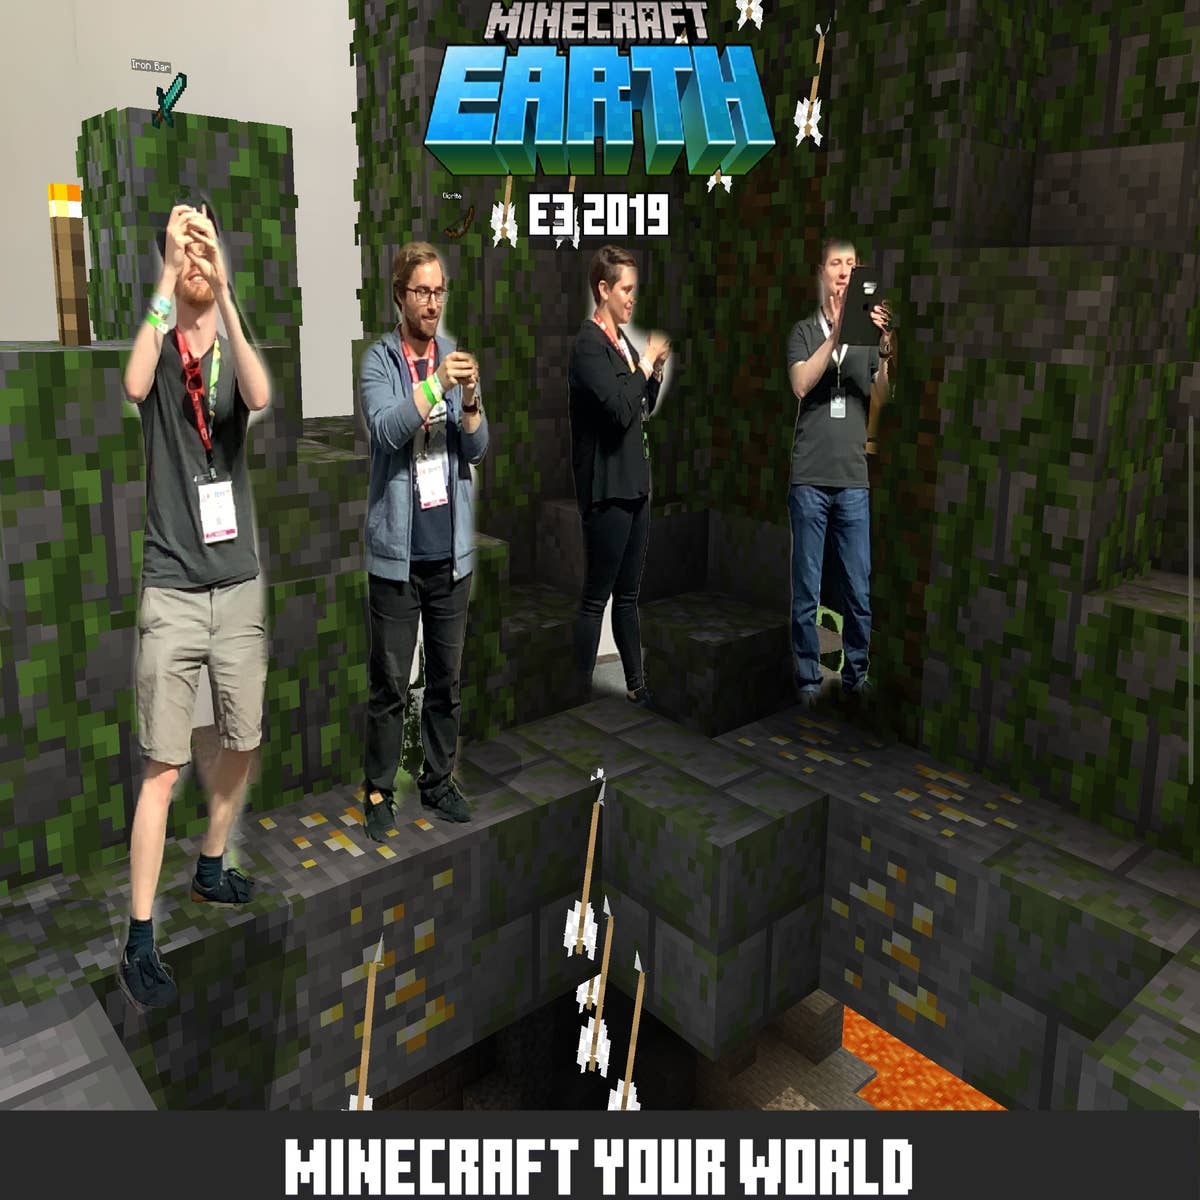 Minecraft Earth on X: Minecraft Earth may be setting off into the